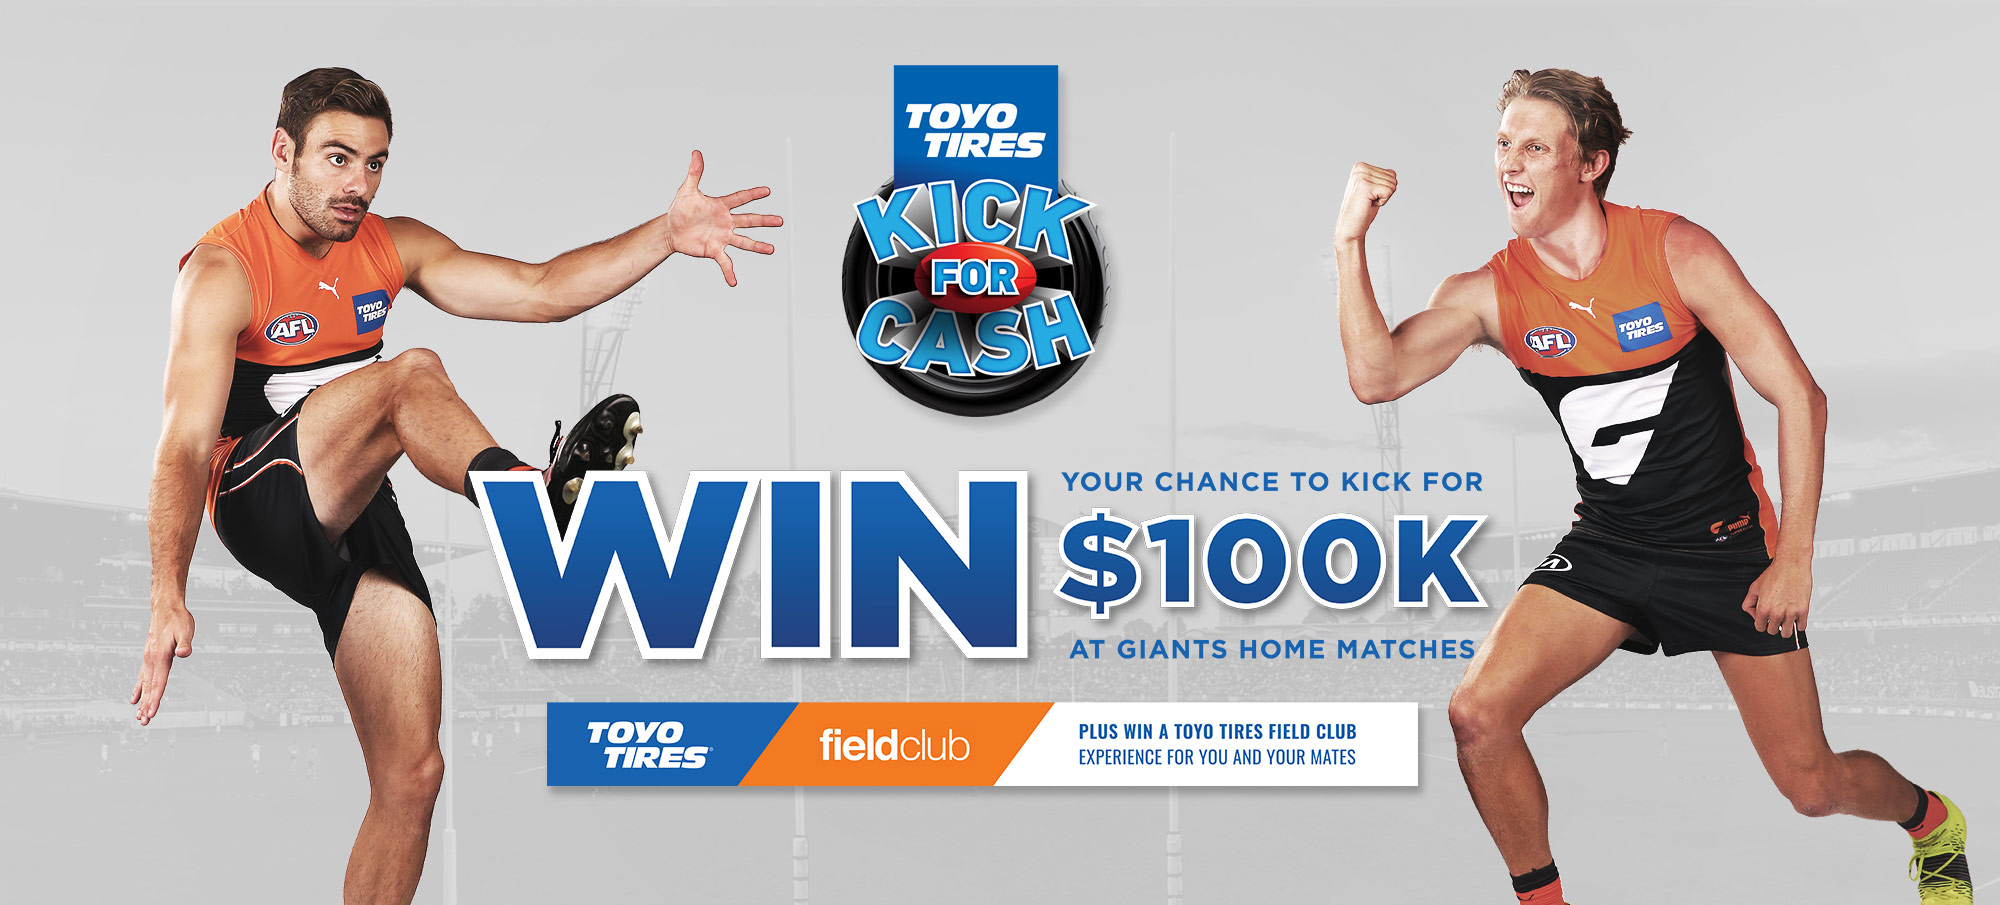 Win your chance to kick for $100k, enter your details to be in the draw.